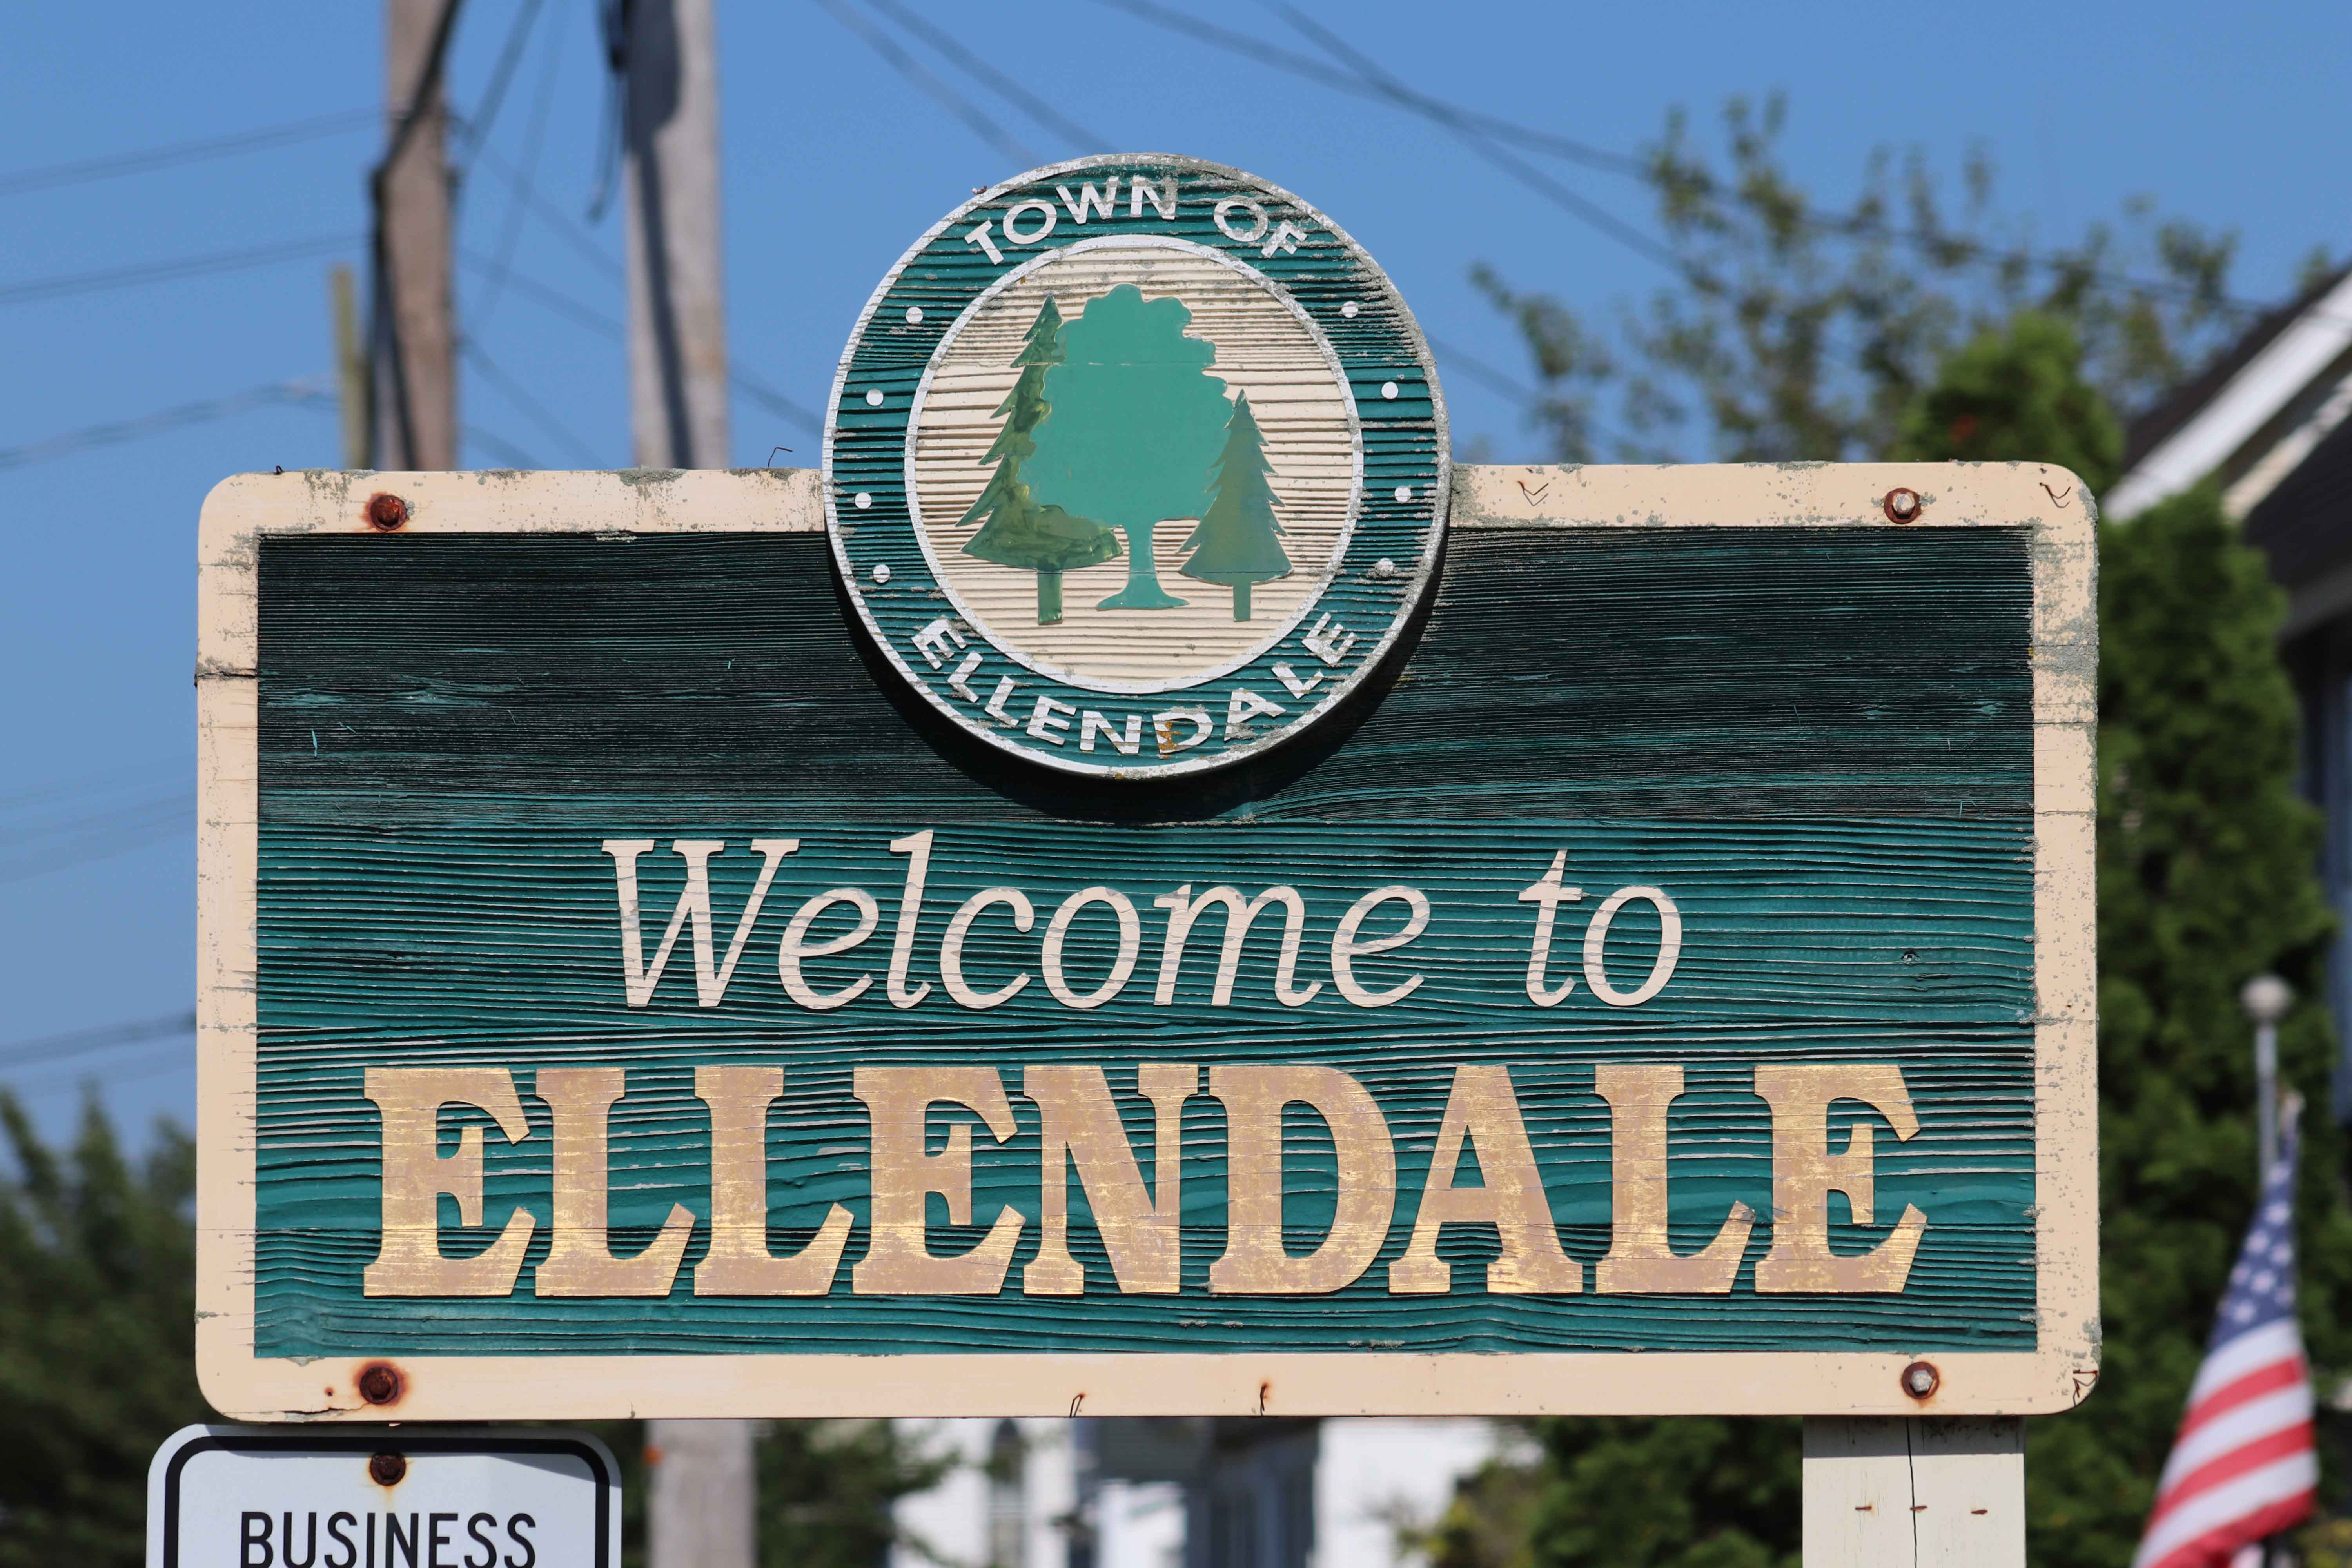 Welcome to Ellendale Delaware